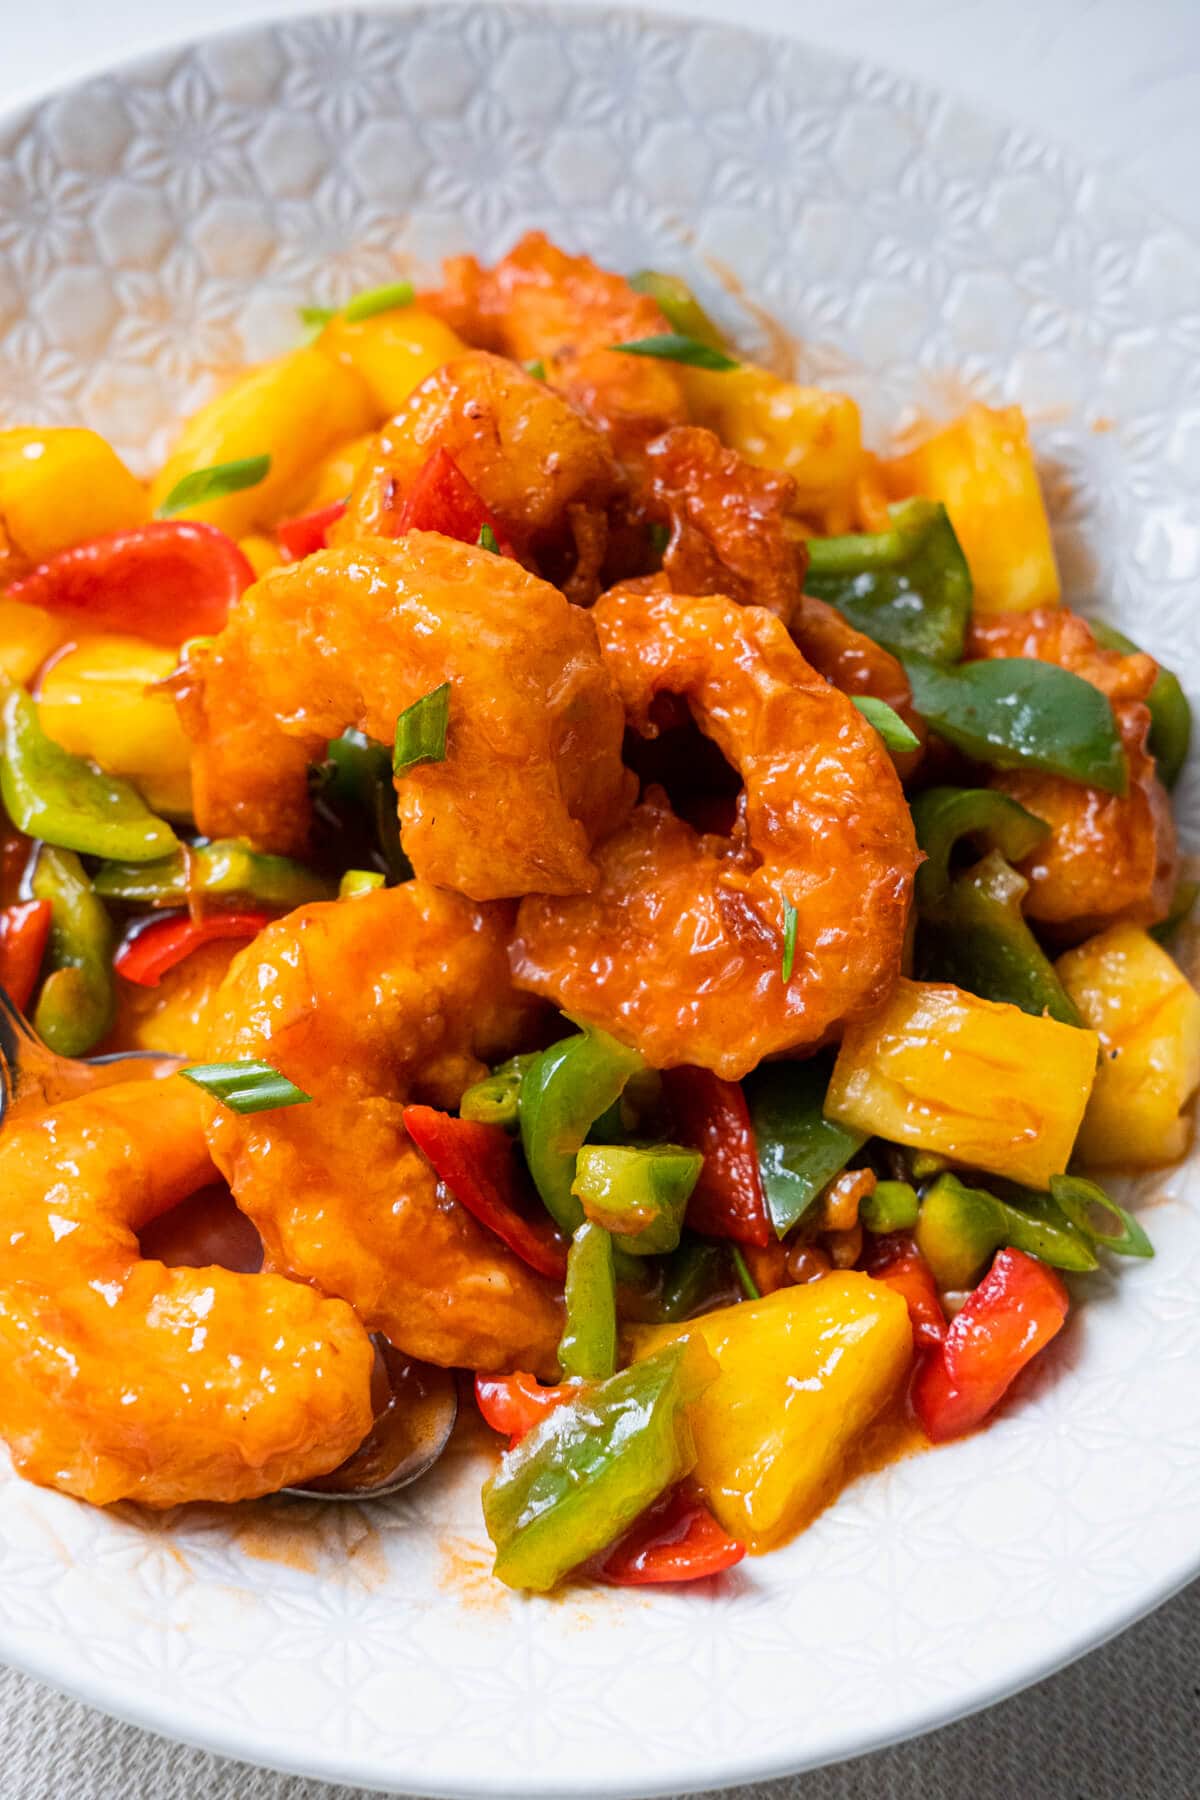 Sweet and sour shrimp lightly coated in red tomato sauce mixture and served together with small pieces of green and red bell pepper and pineapple. 